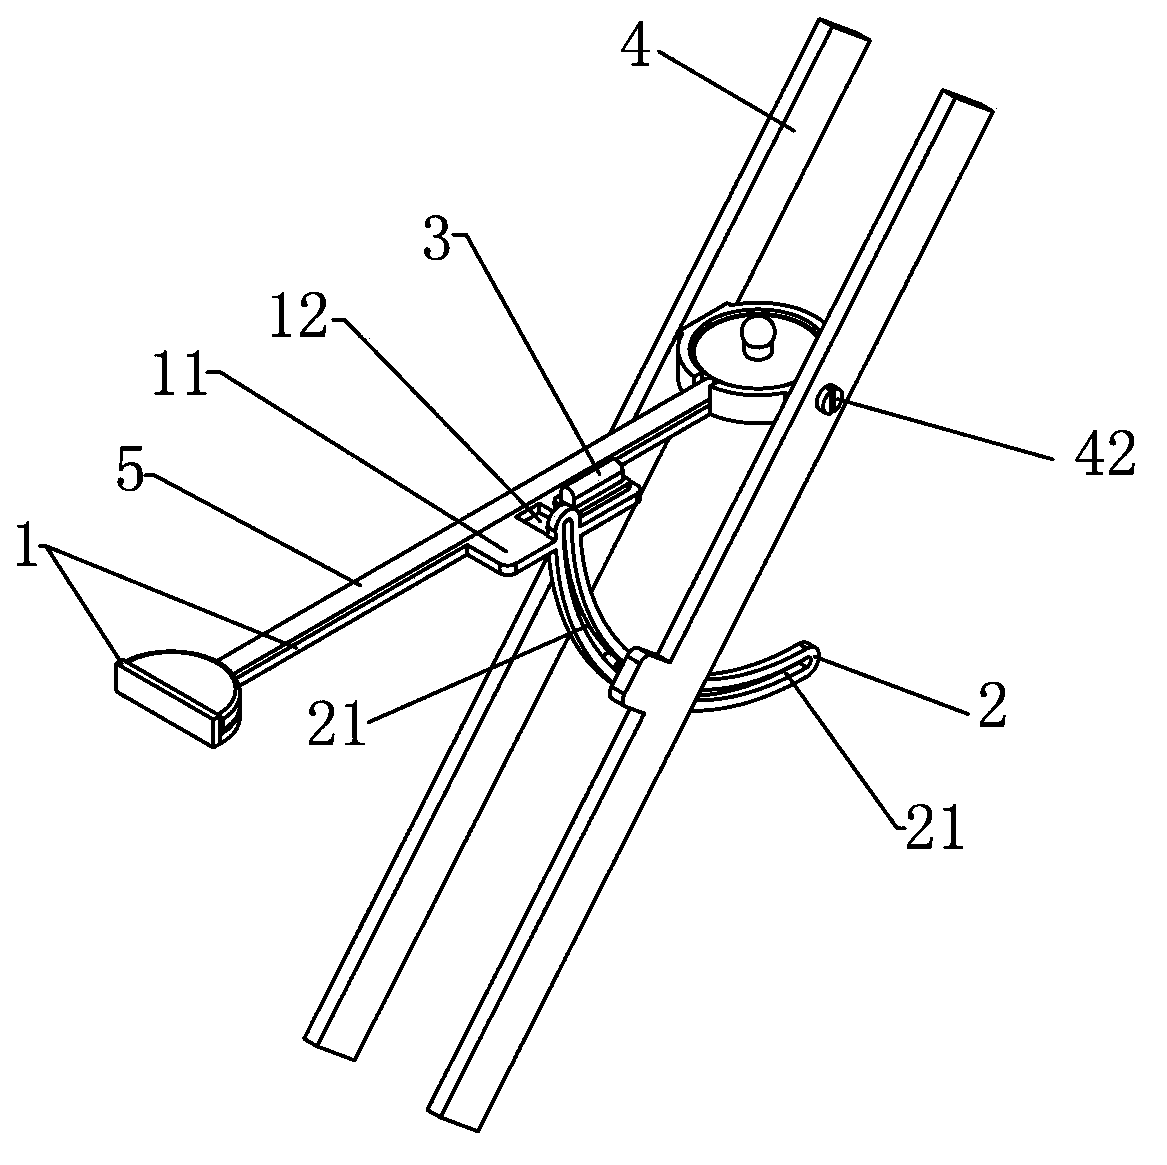 Bend angle adjustment testing frame for field strength probe